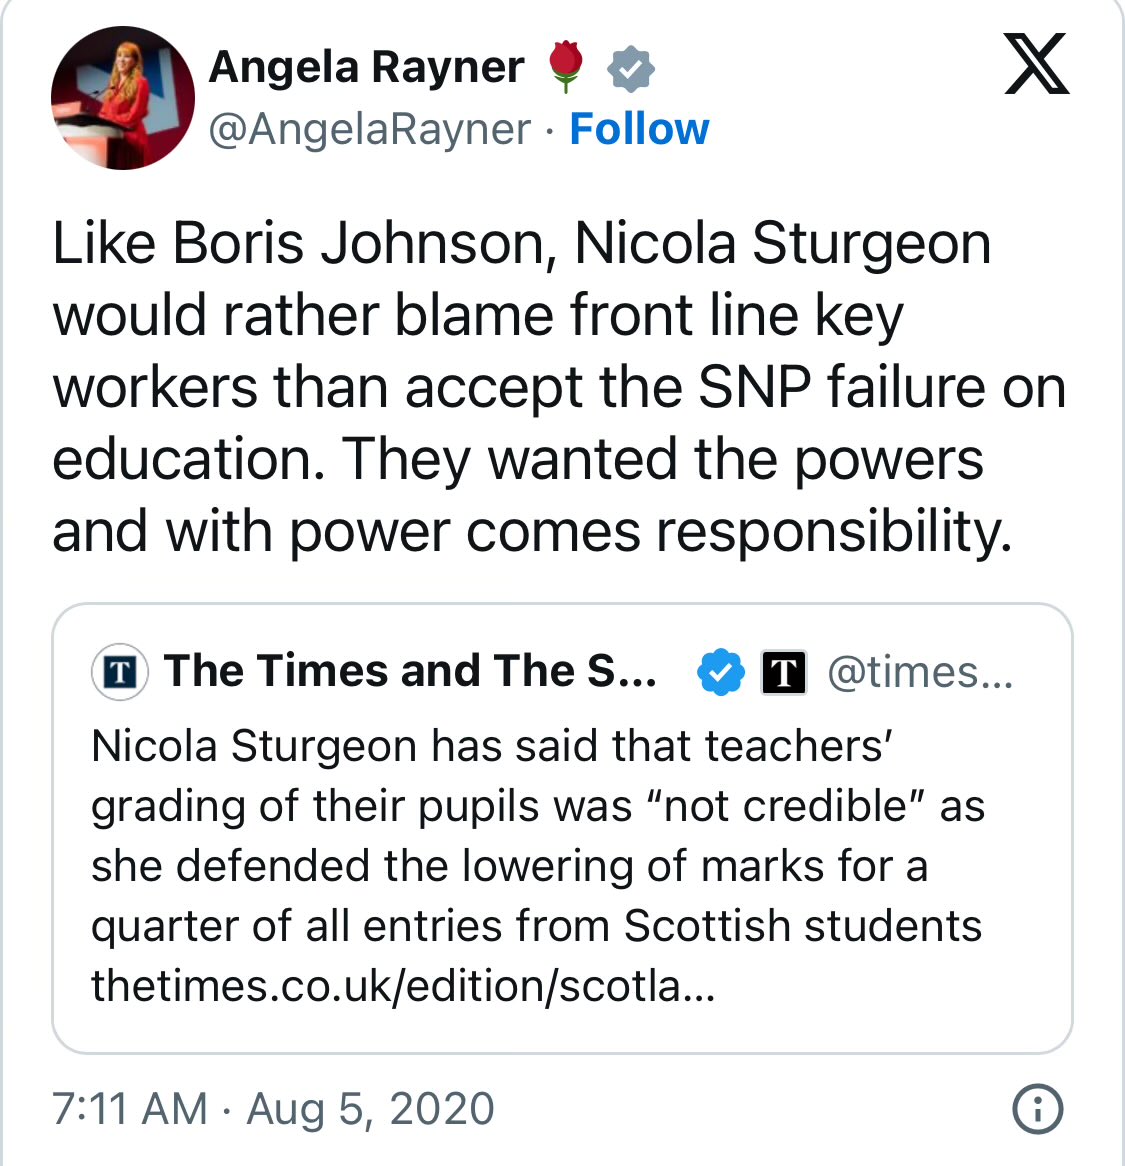 I feel no pity for Angela Rayner. She will put the political boot in when she can !